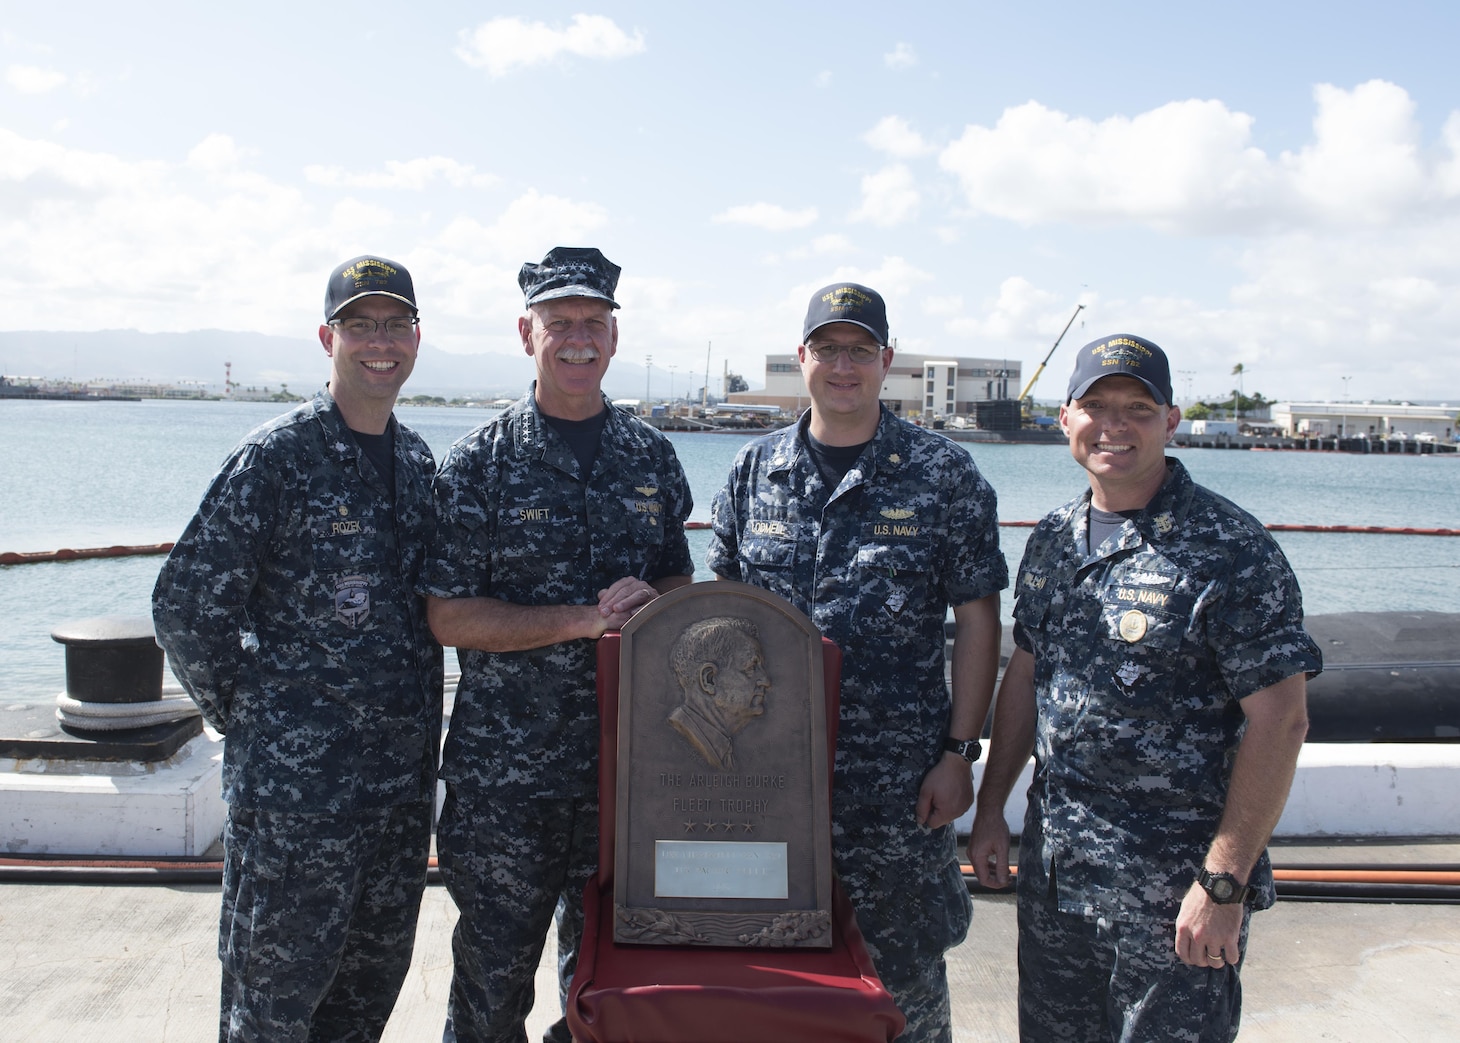 170830-N-KV911-104 PEARL HARBOR, Hawaii (Aug. 30, 2017) Adm. Scott Swift, commander, U.S. Pacific Fleet presents the Arleigh Burke Fleet Trophy to the crew of the Virginia-class fast-attack submarine USS Mississippi (SSN 782). The trophy is awarded to a ship that best represents the fleet, achieving the best overall improvement in battle efficiency, and is presented annually to the most-improved ships or aviation squadrons in both the Atlantic and Pacific Fleets. (U.S. Navy photo by Mass Communication Specialist 2nd Class Shaun Griffin)